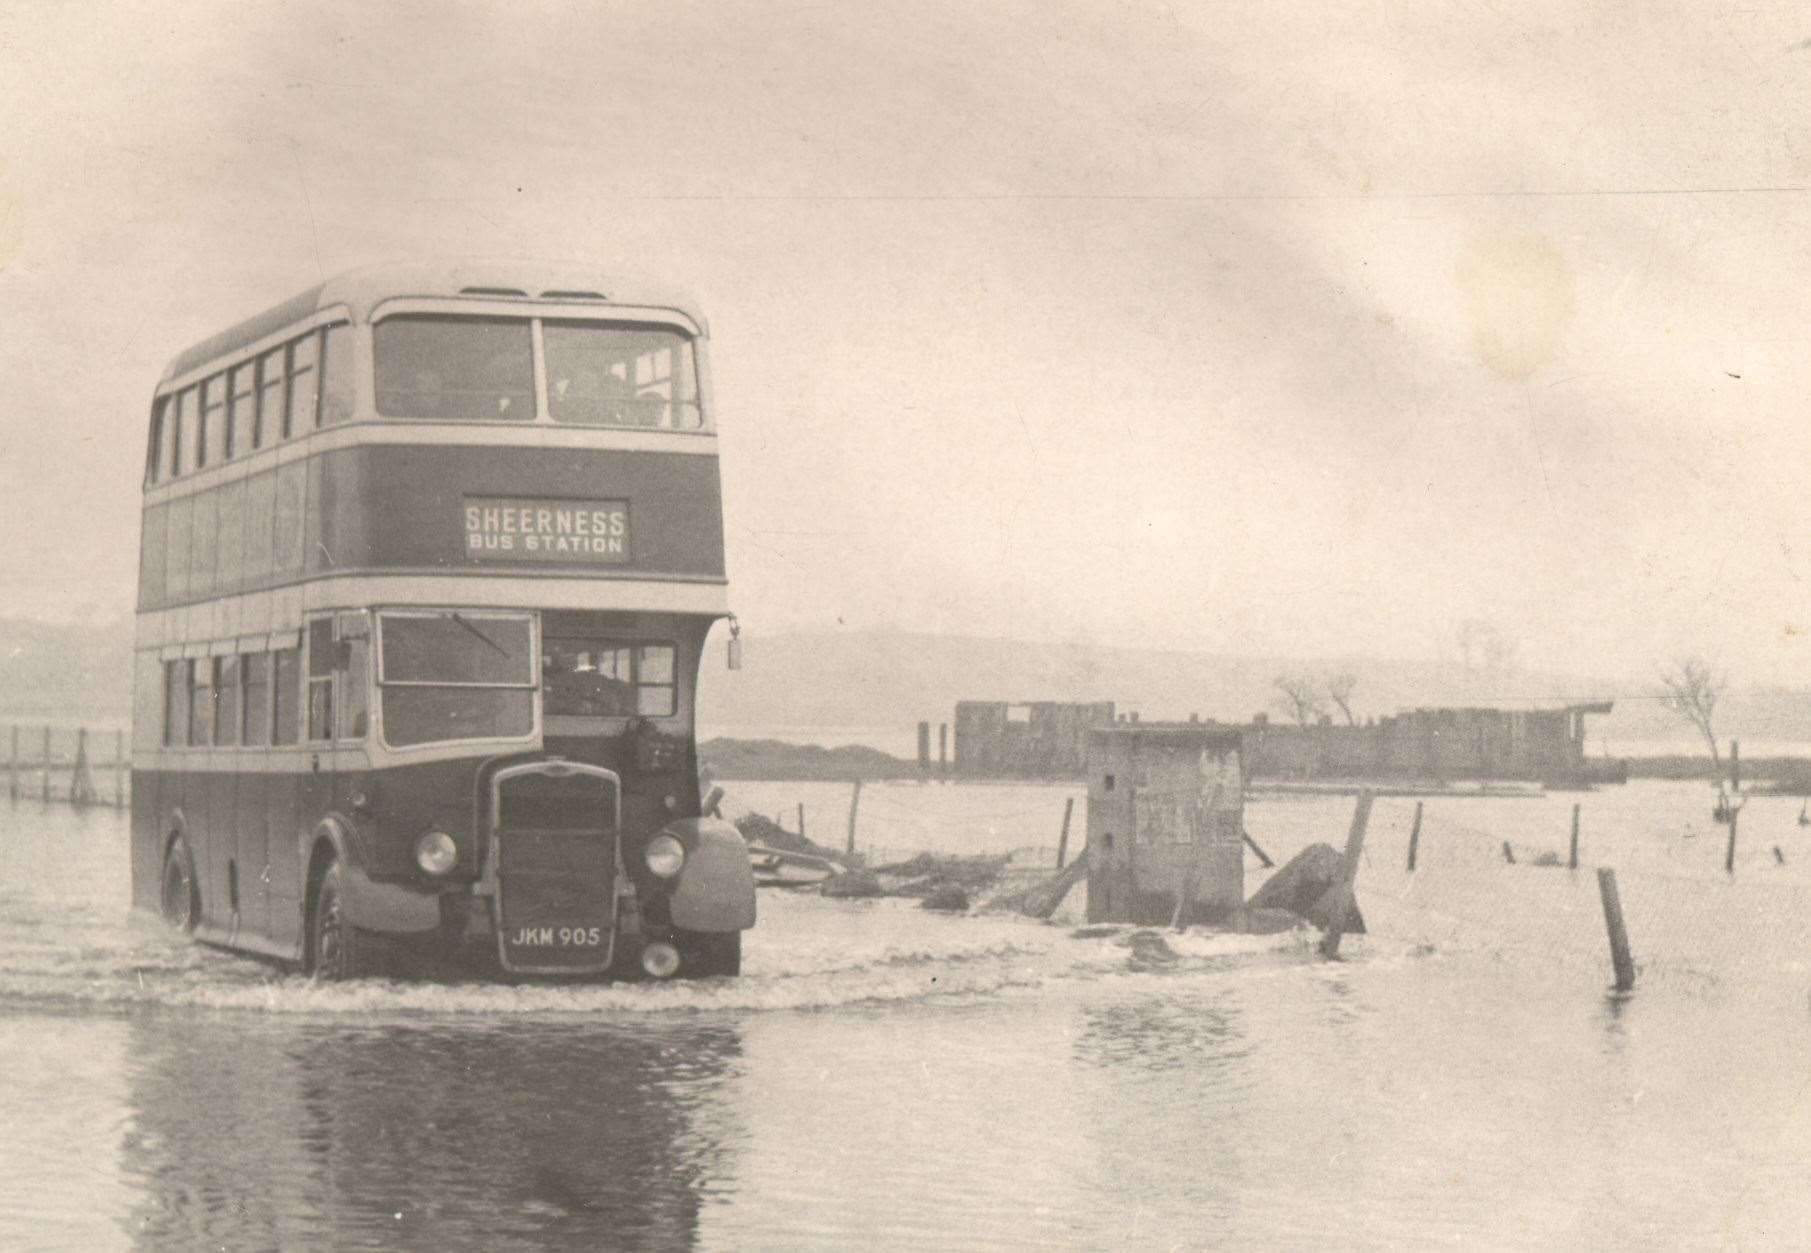 As the tide began to recede, this bus was able to negotiate Halfway Road en route to Sheerness bus station